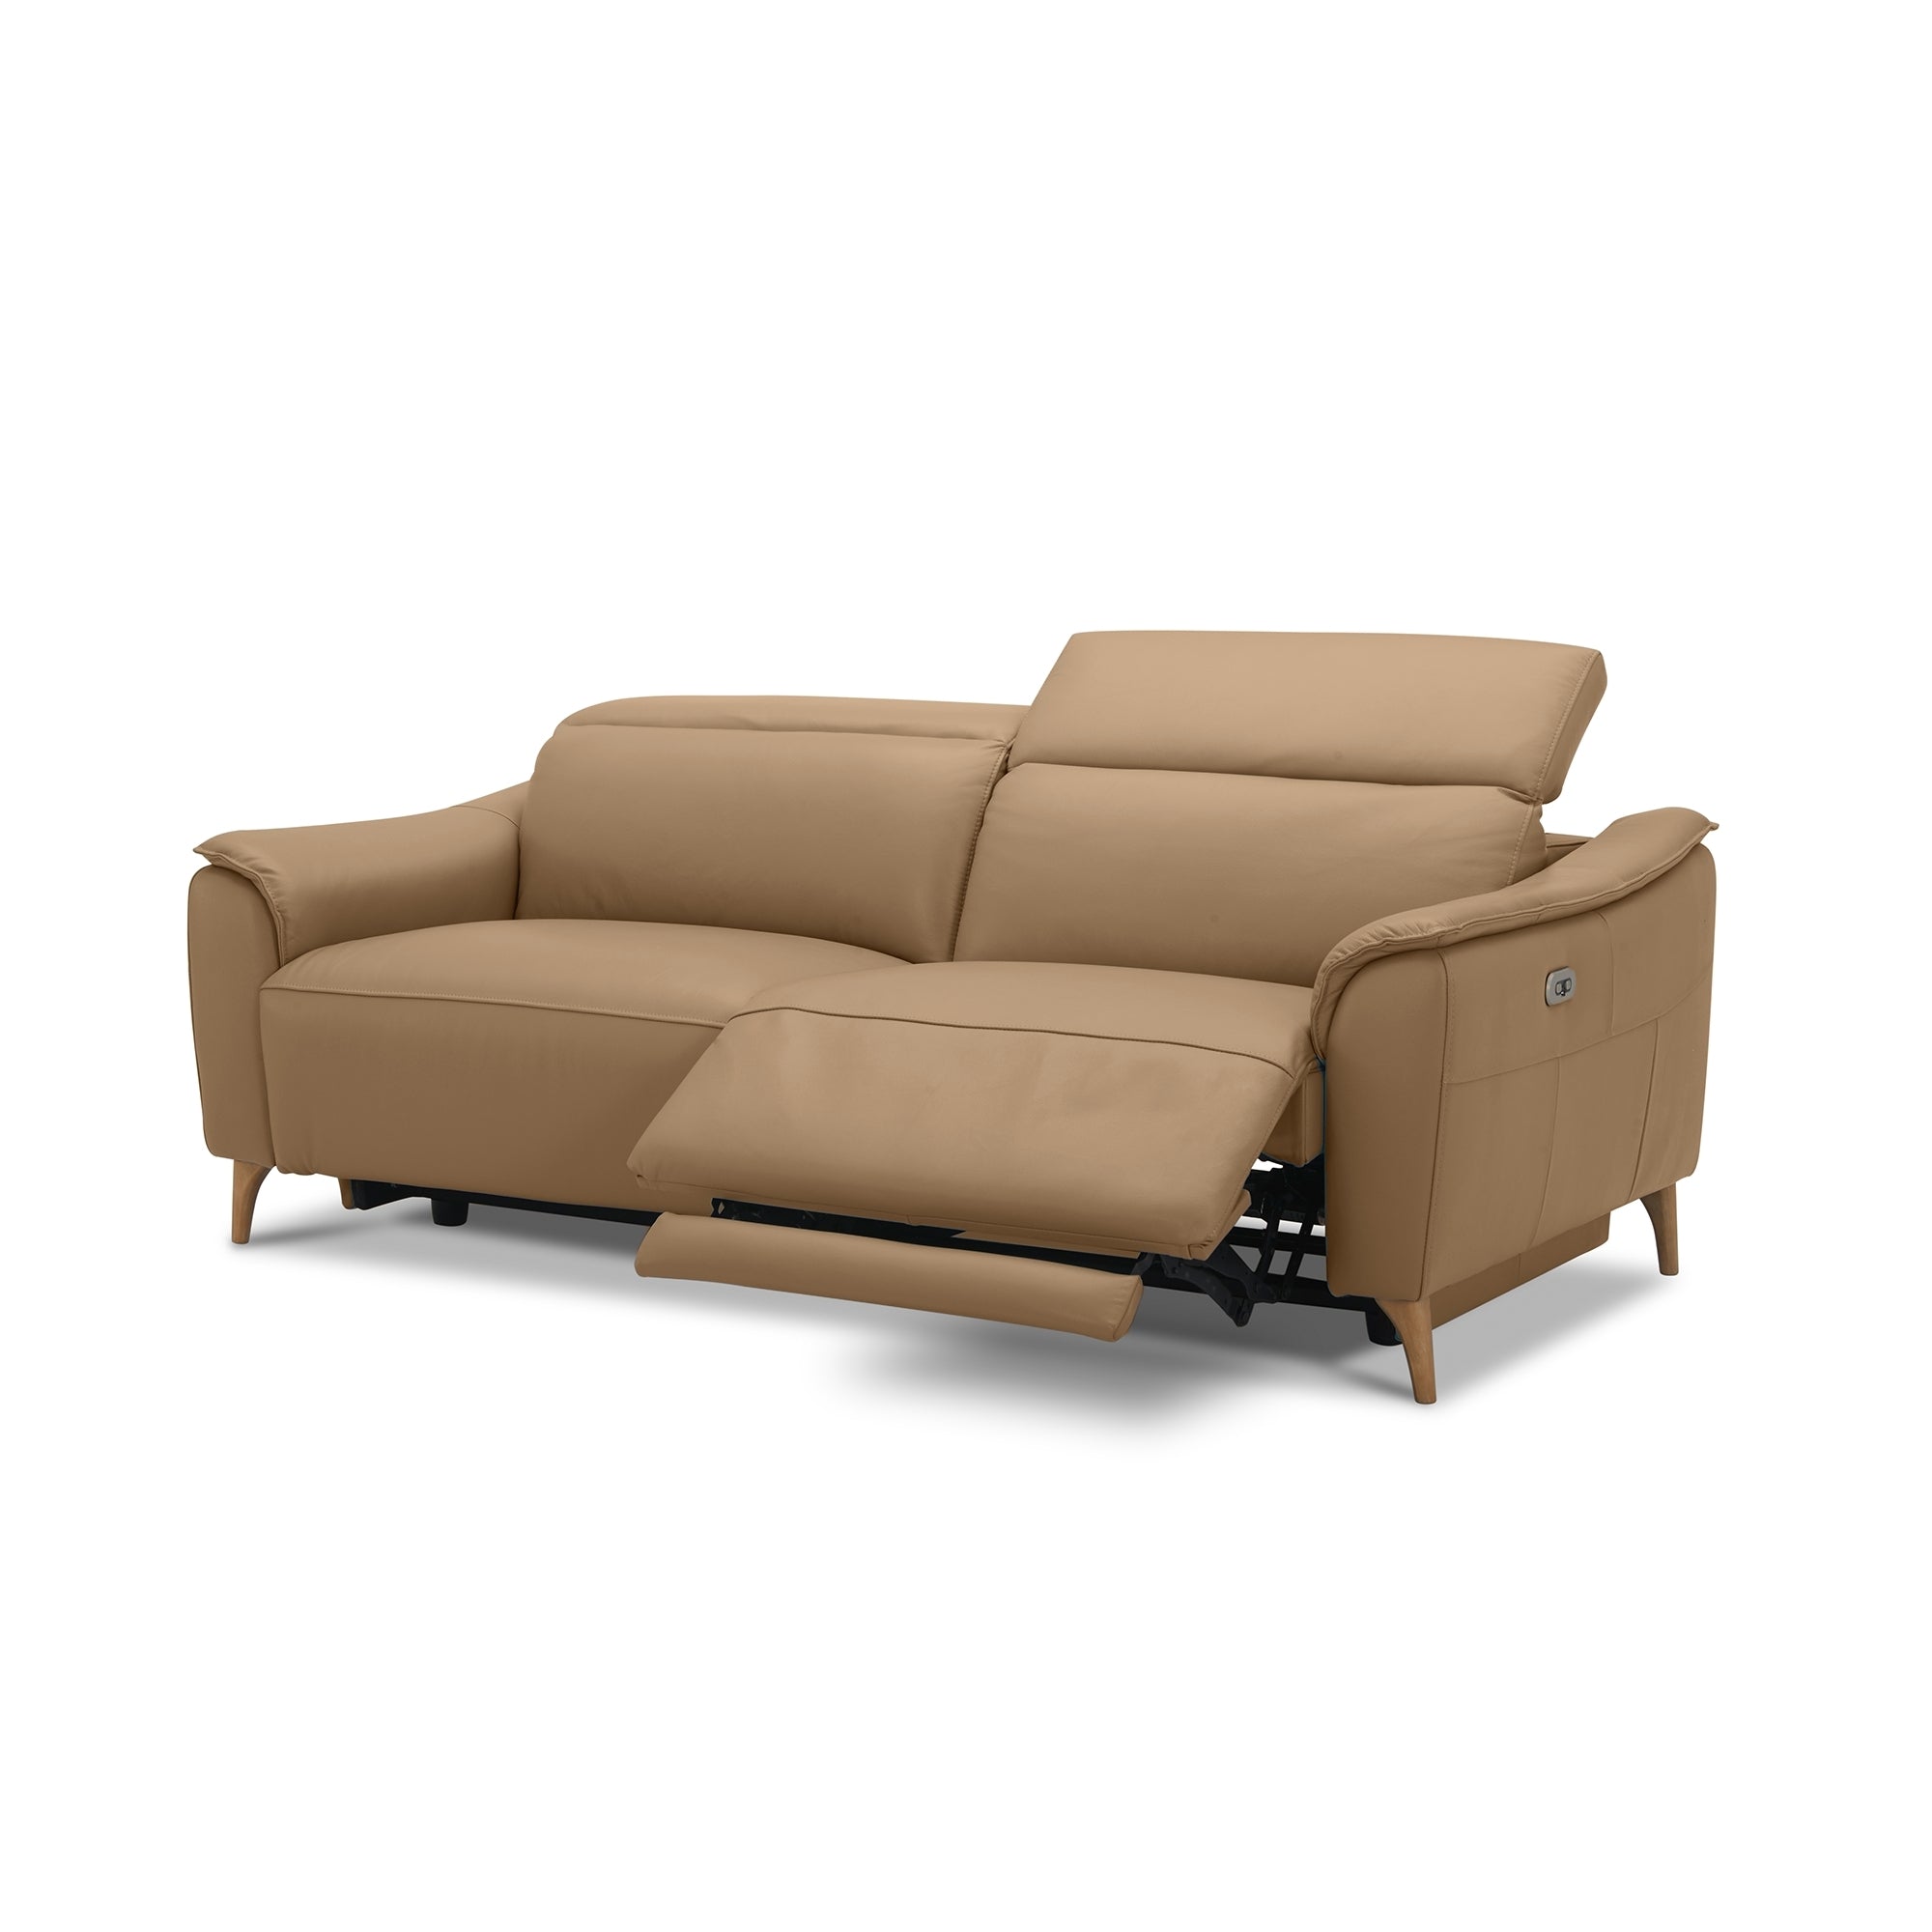 Inala 2.5 Seater Genuine Leather Sofa Lounge Electric Powered Recliner Latte